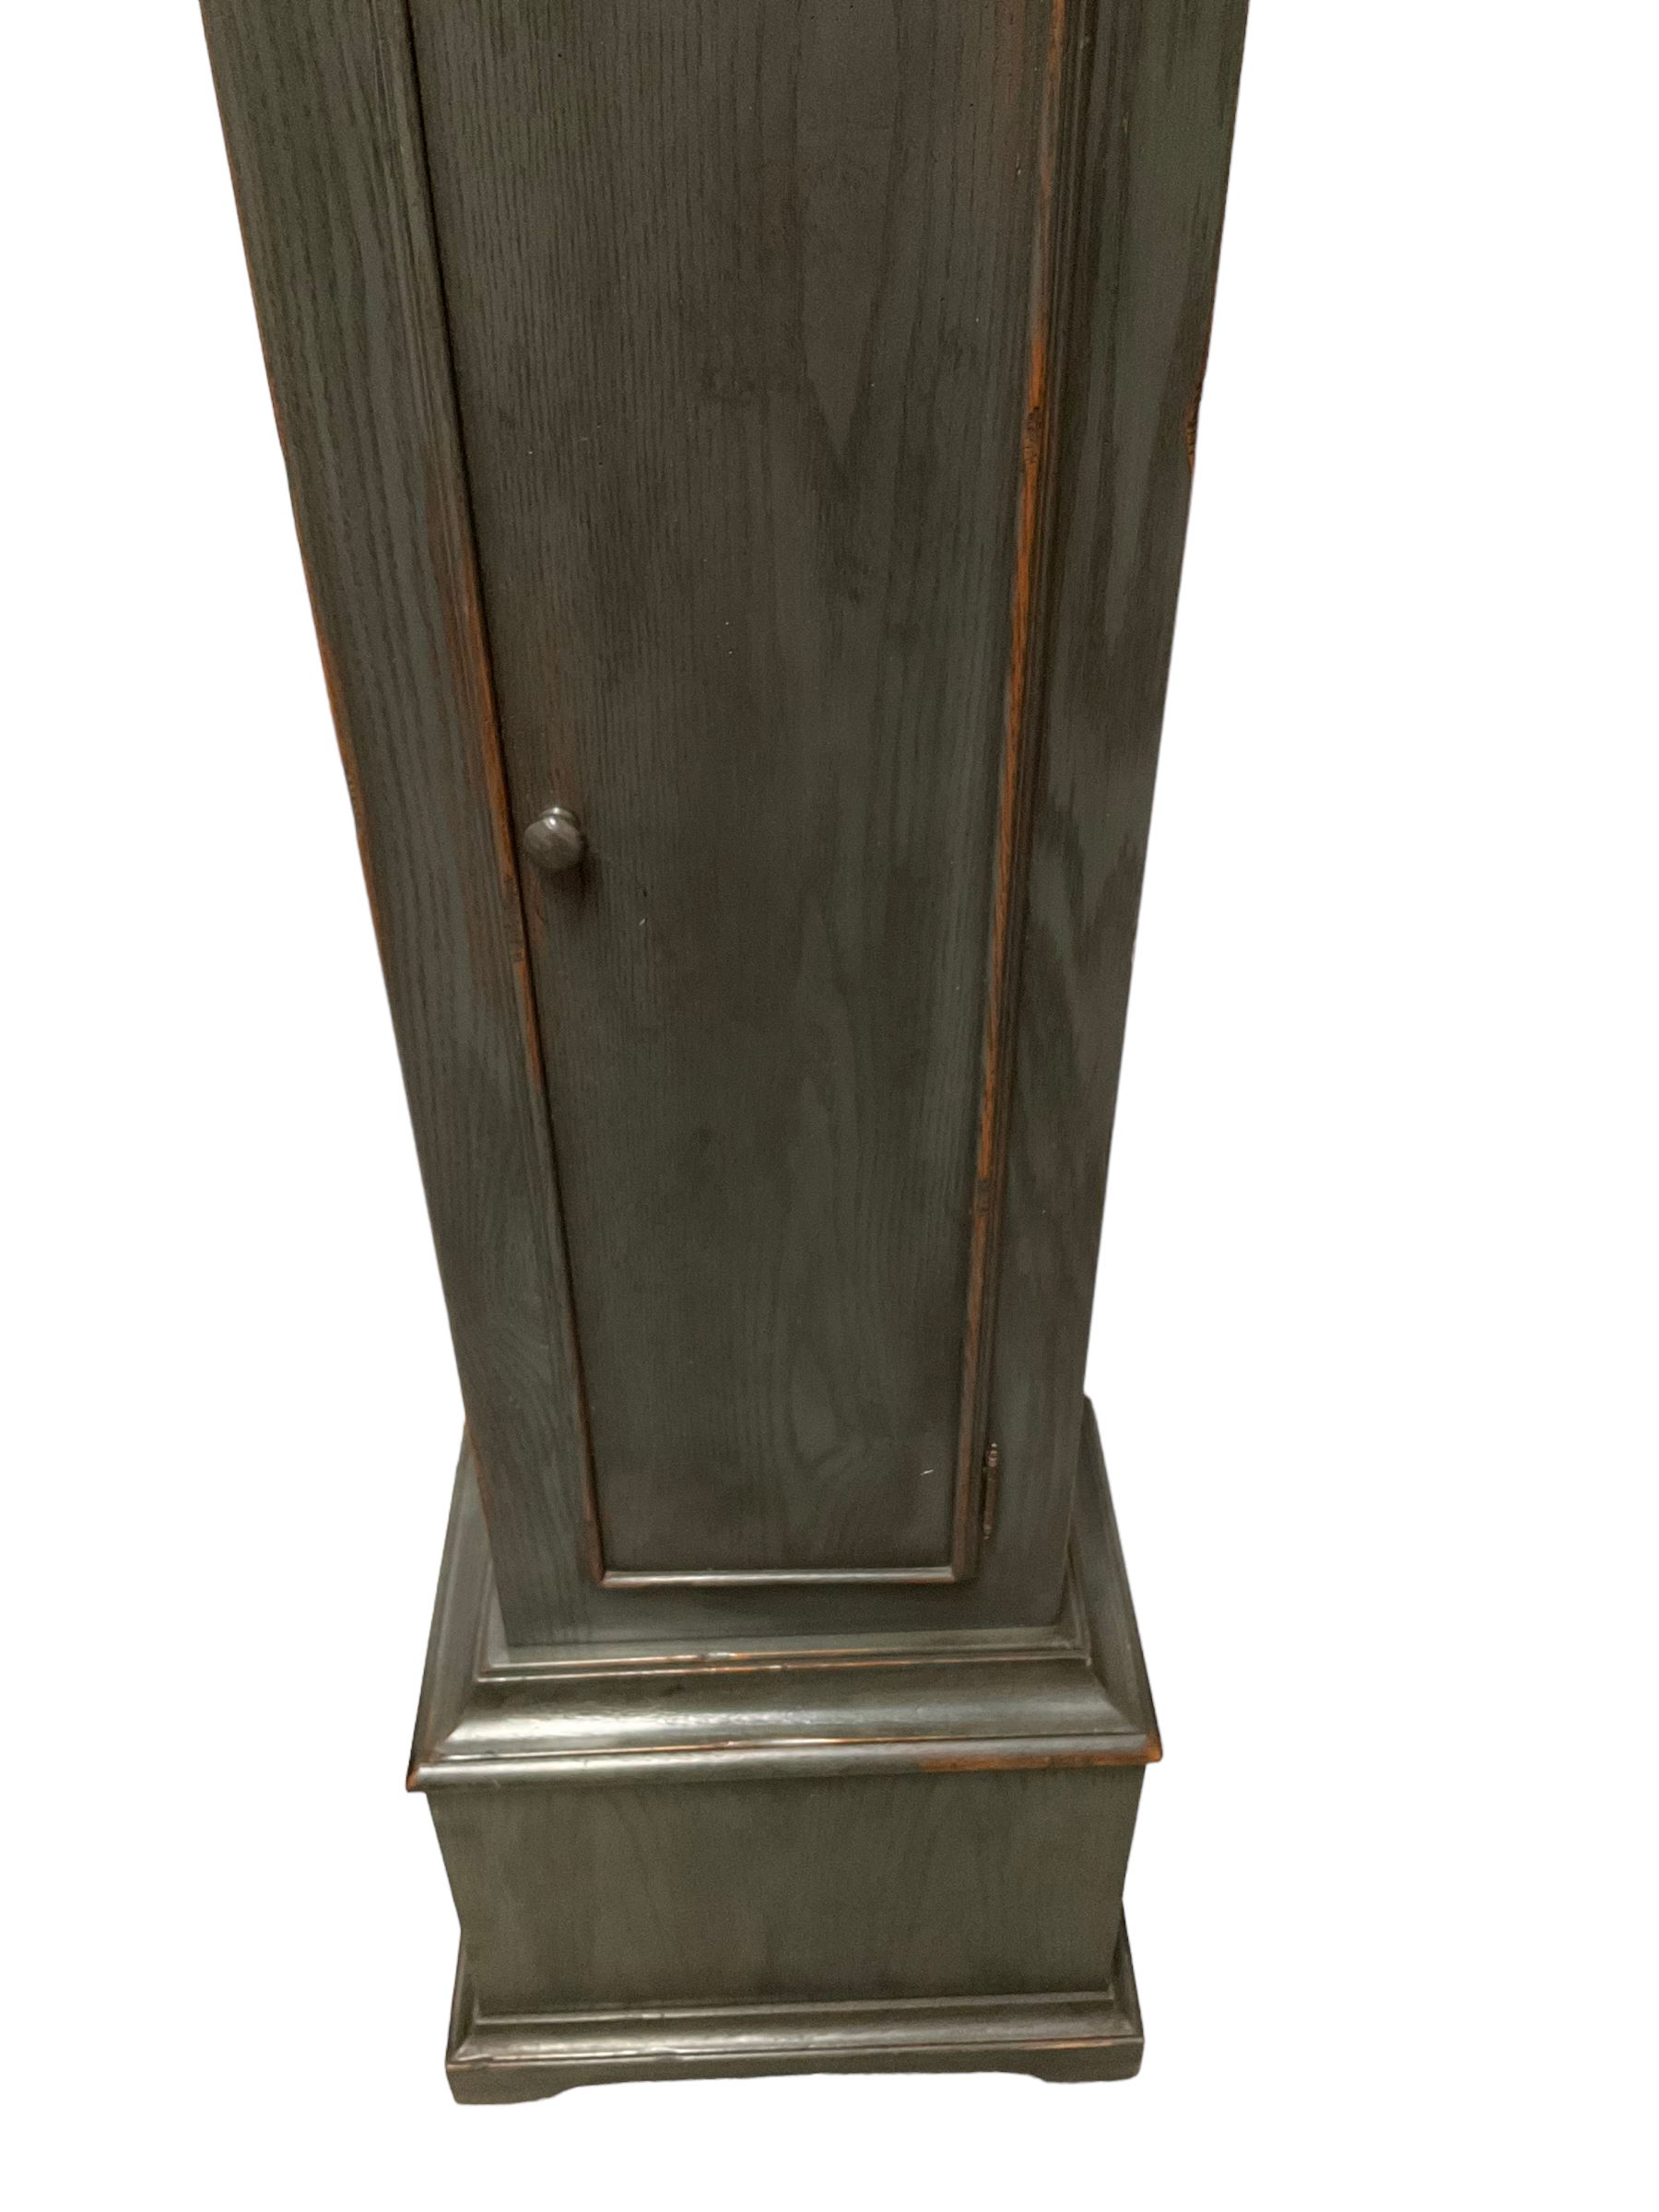 20th century - contemporary longcase clock in an 18th century style case - Image 3 of 6